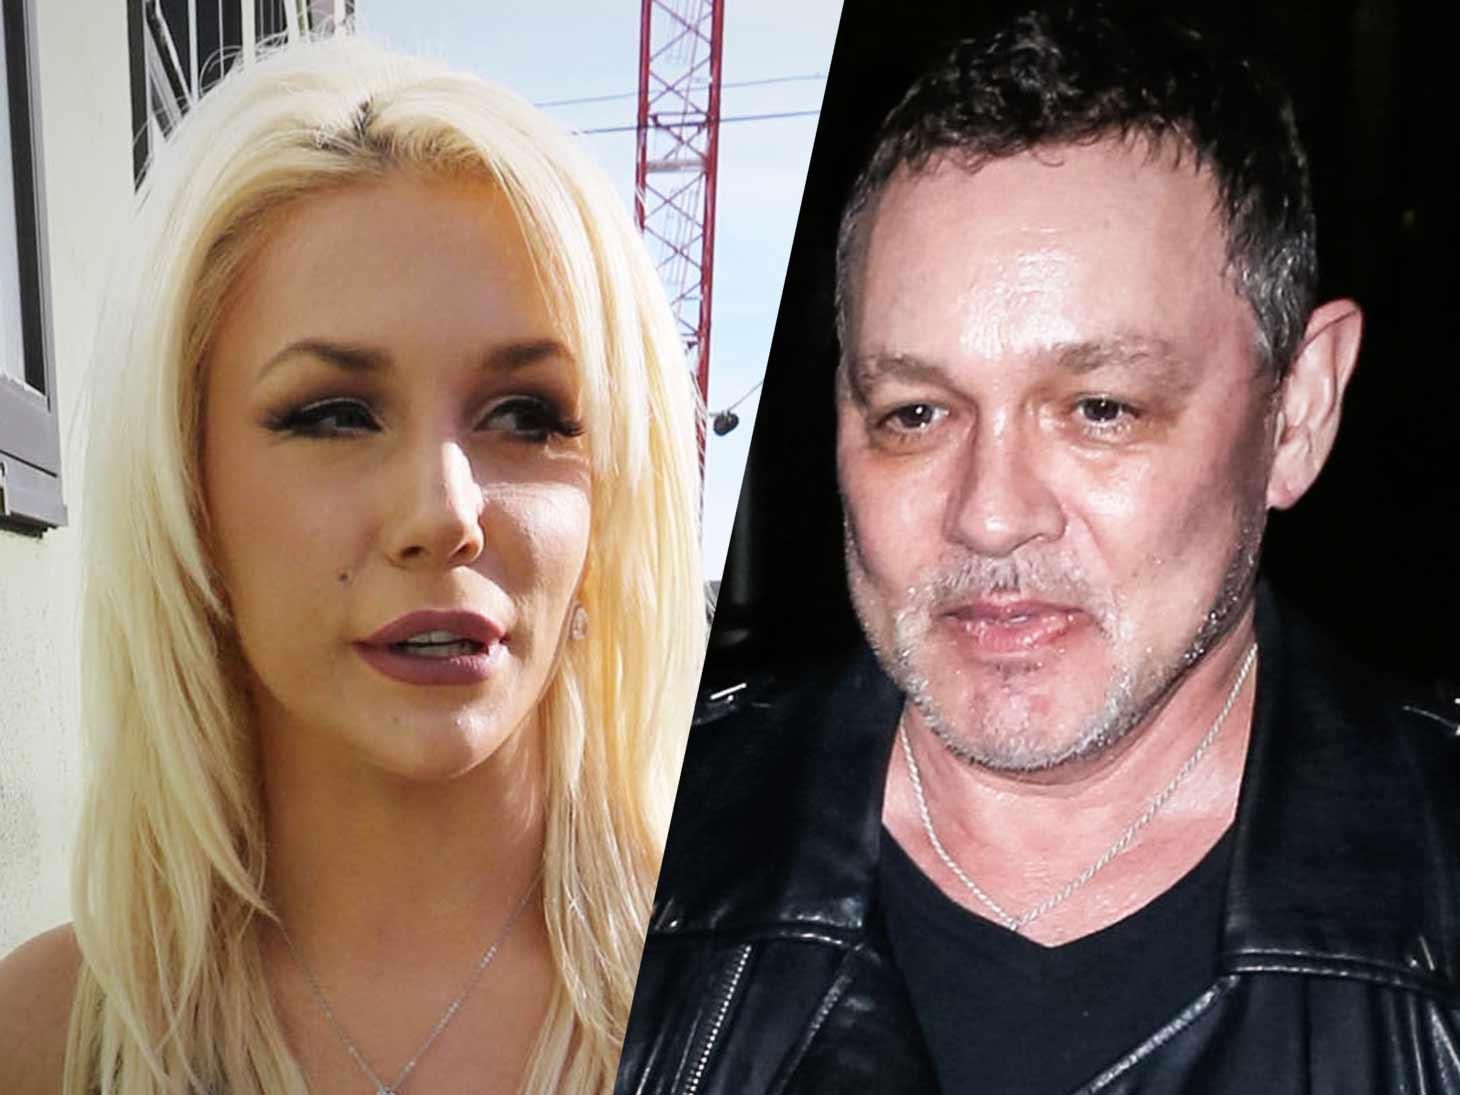 Courtney Stodden Pleads With Judge to Sign Off on Divorce from Doug Hutchison